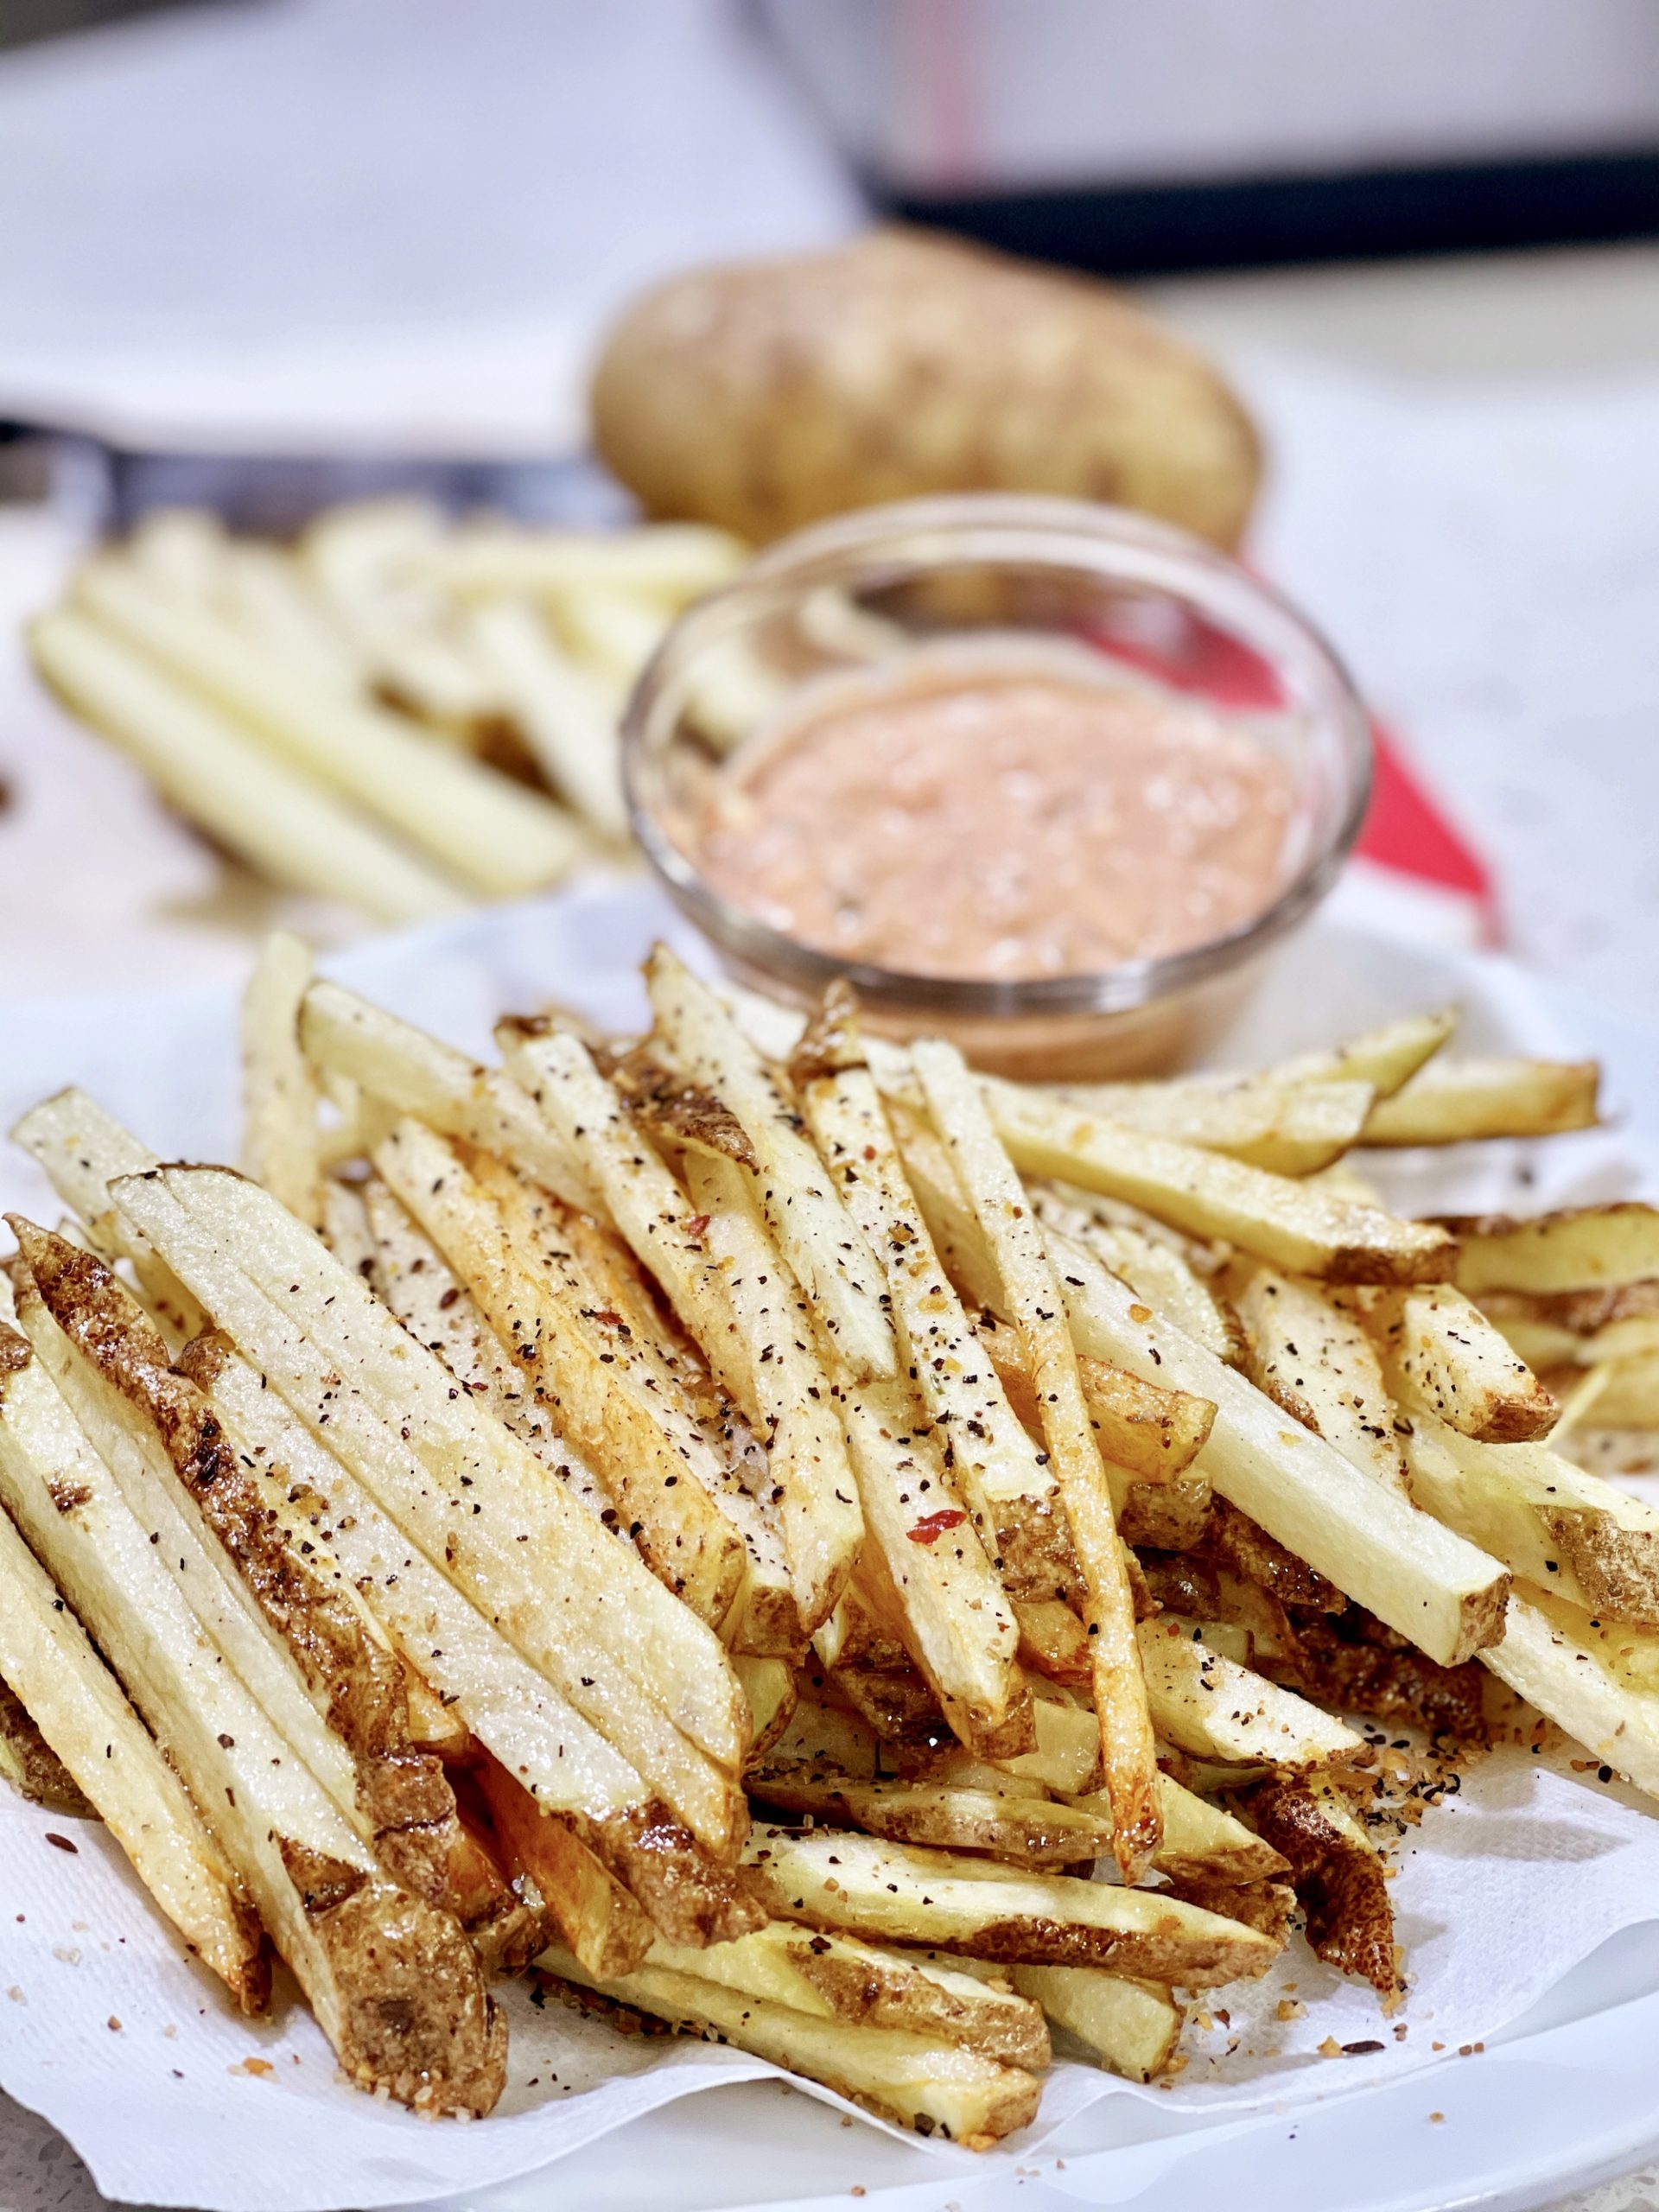 https://cookingwithchefbryan.com/wp-content/uploads/2021/04/Hand-Cut-French-Fries-with-Ultimate-Dipping-Sauce-scaled.jpg